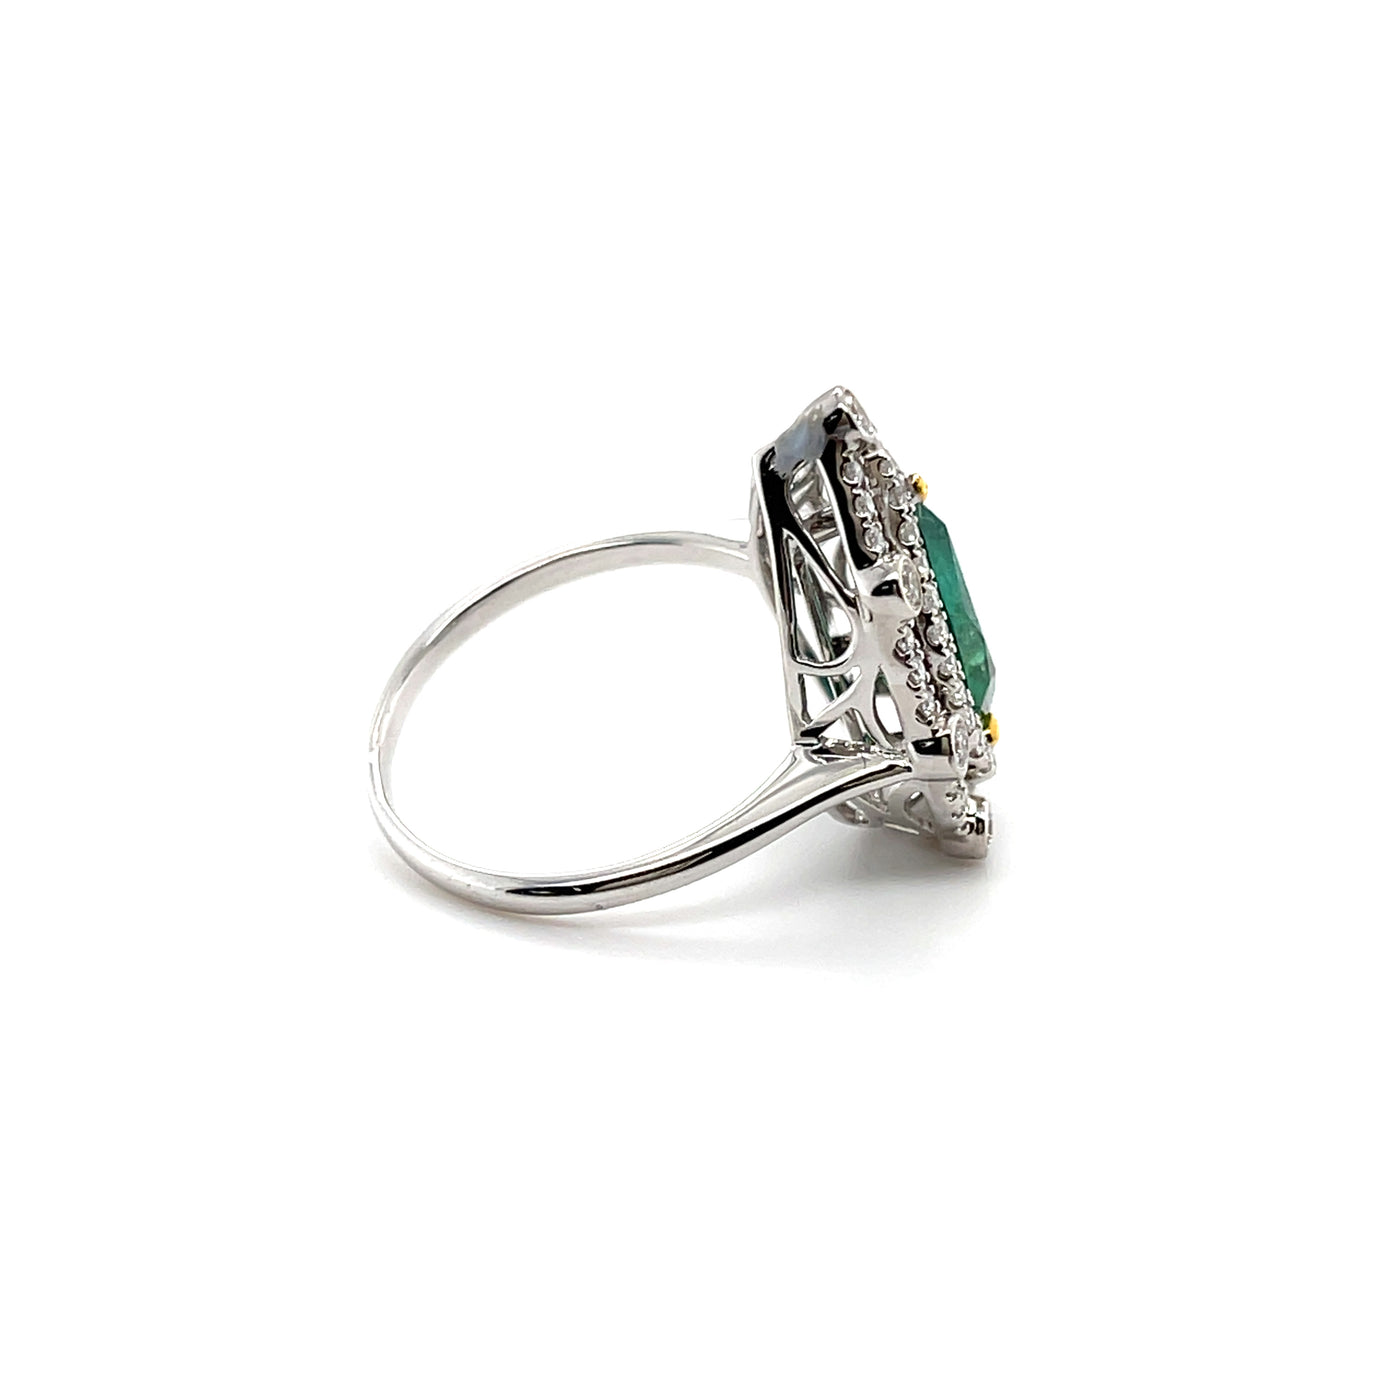 18CT White Gold Pear Emerald and Diamond Ring